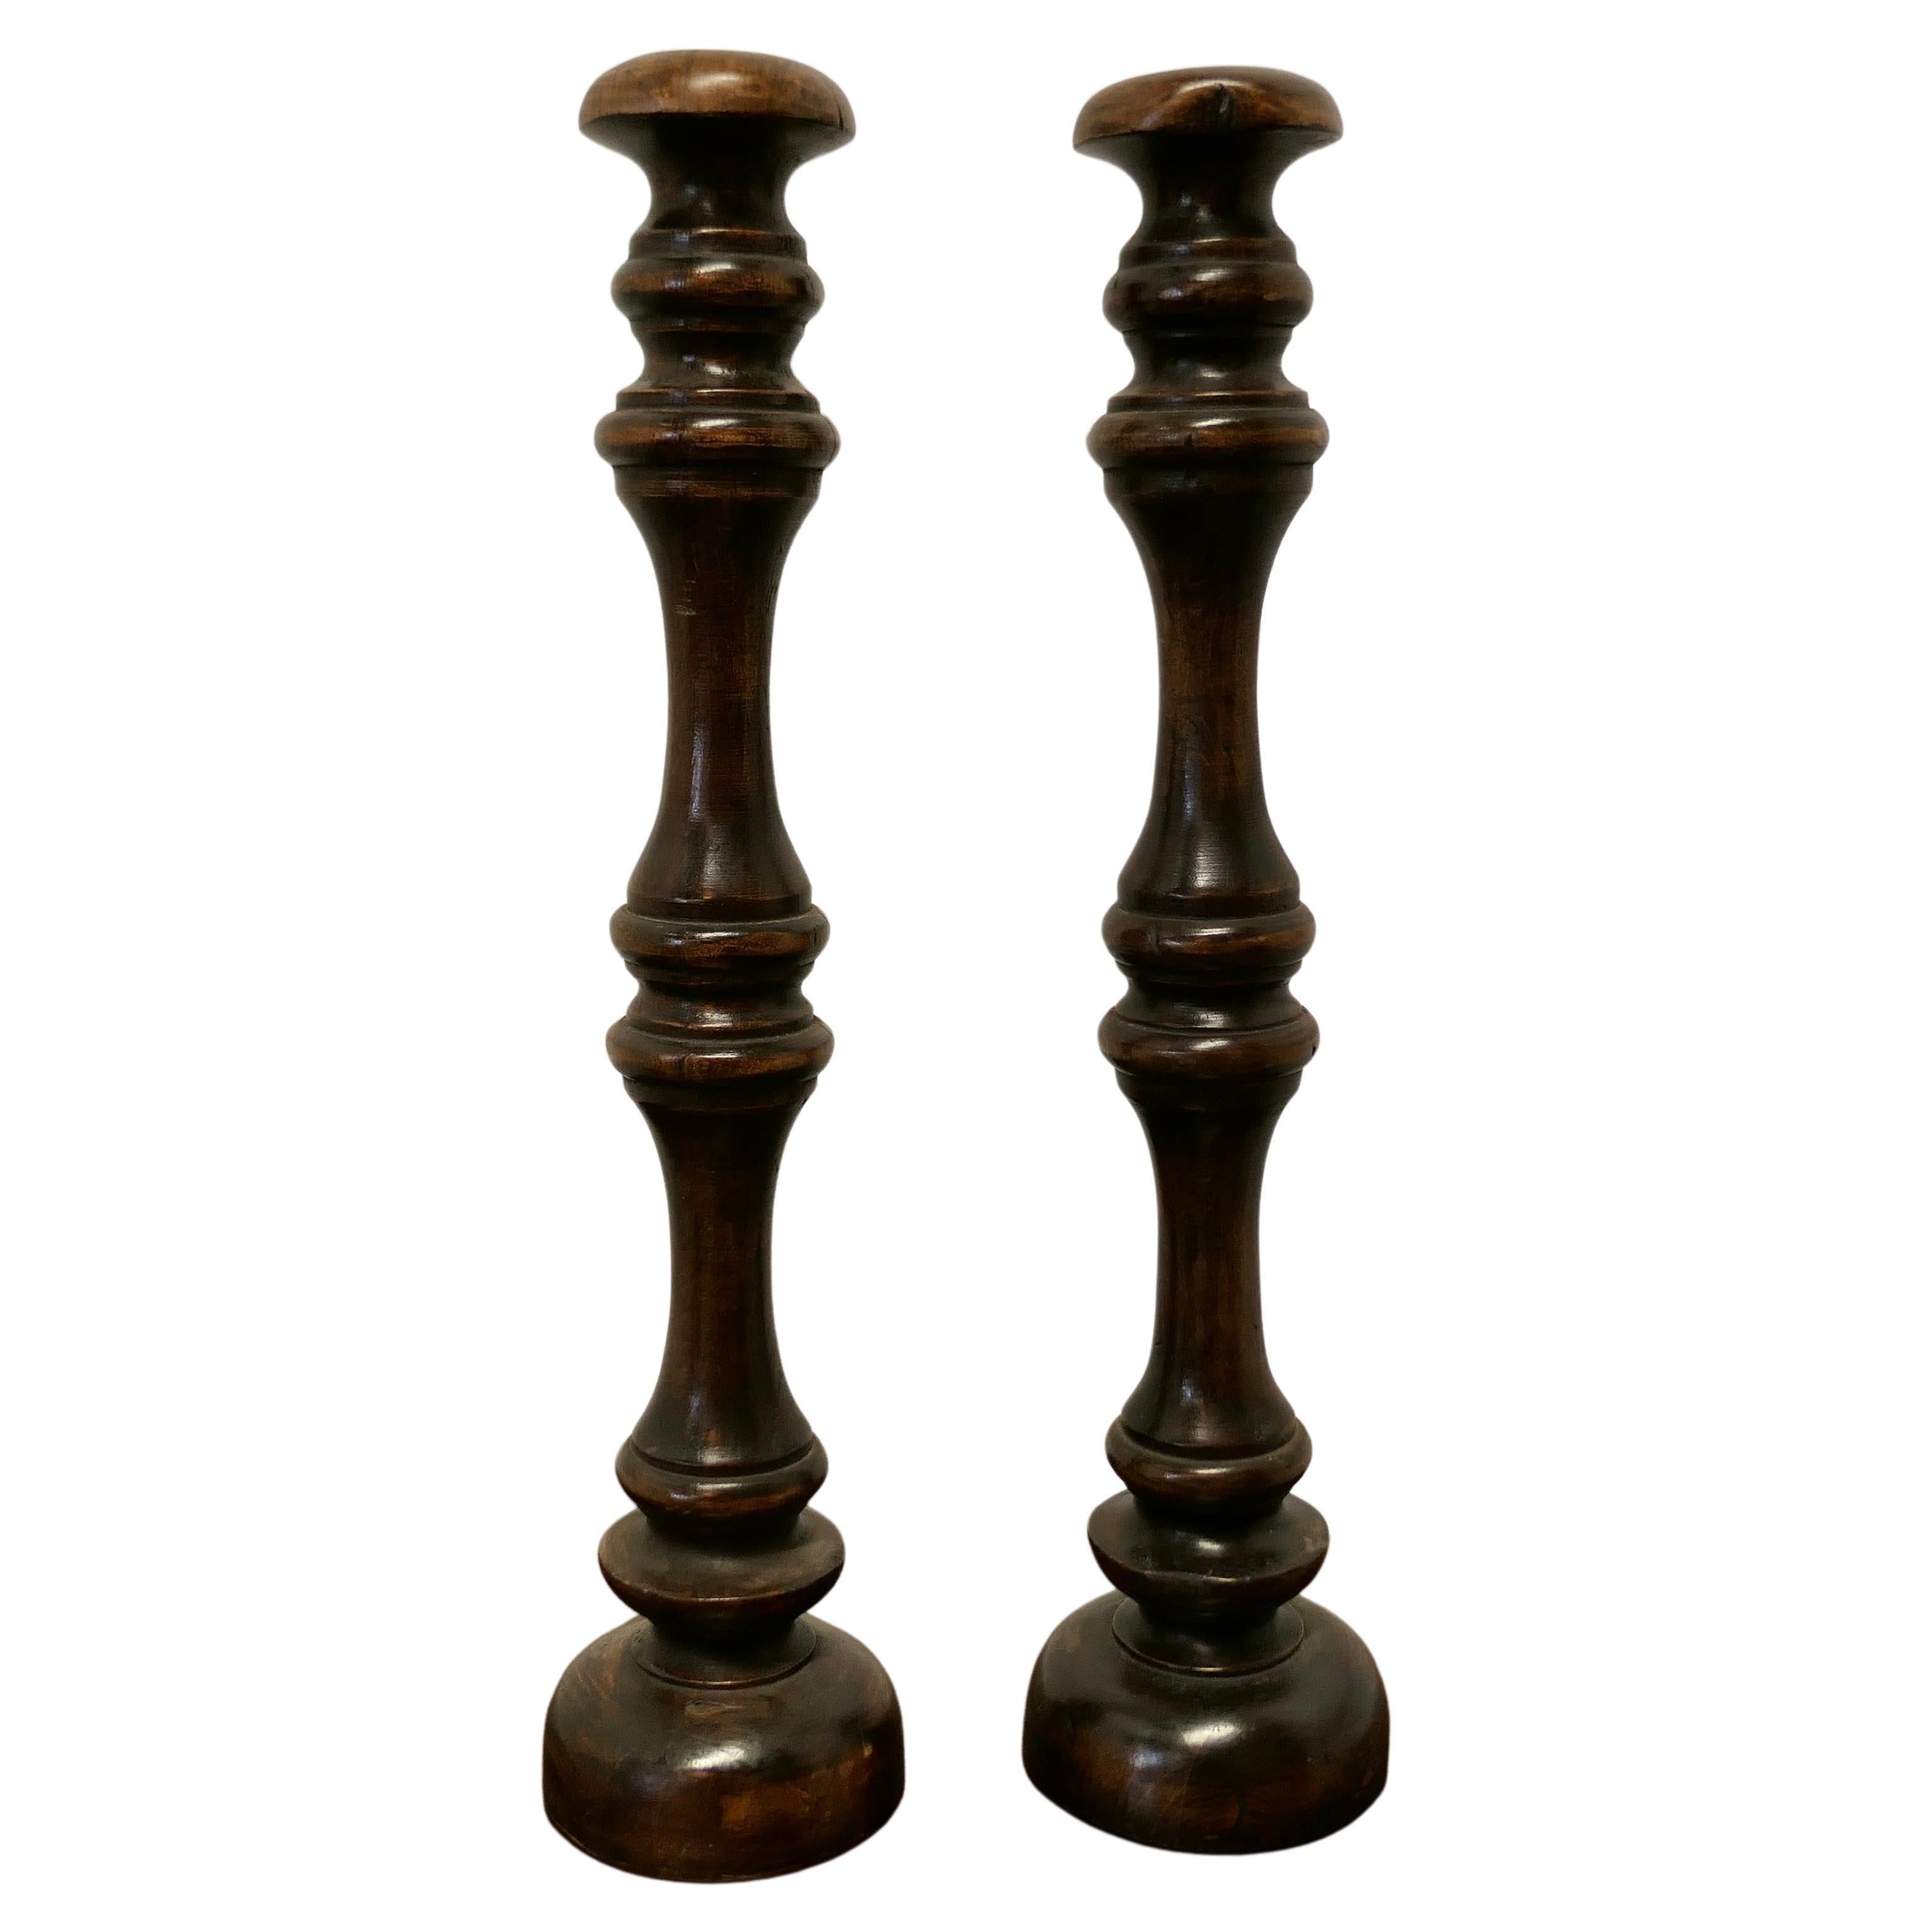 Pair of Tall French Turned Wooden Wig Stands, Shop Display Hats For Sale